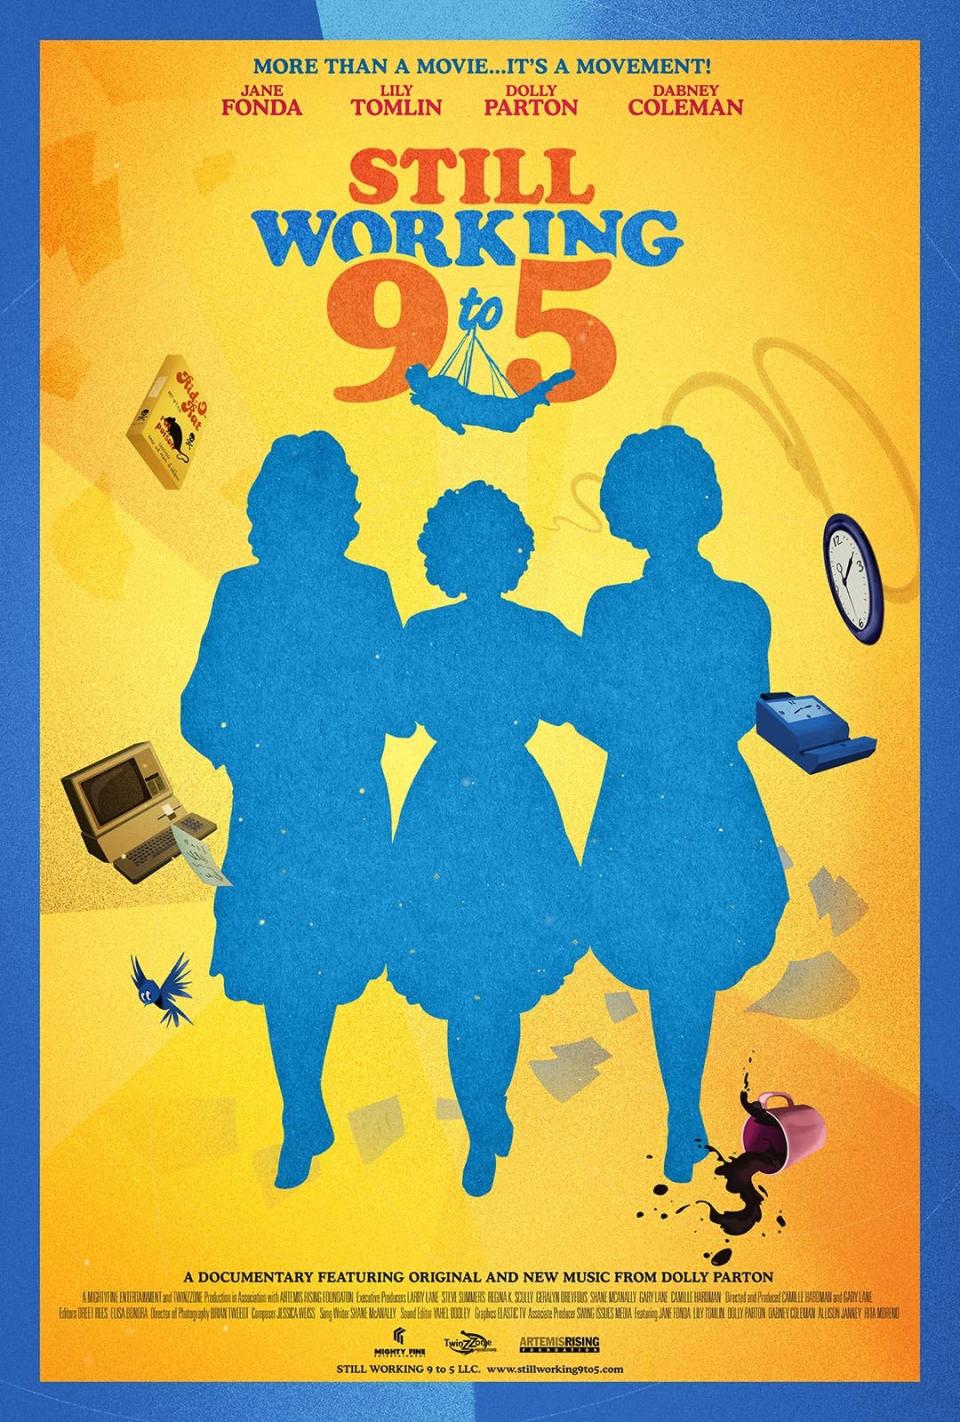 Via  a press release, "'Still Working 9 to 5' explores the challenges and barriers to success for women in the workforce and society since 1980."